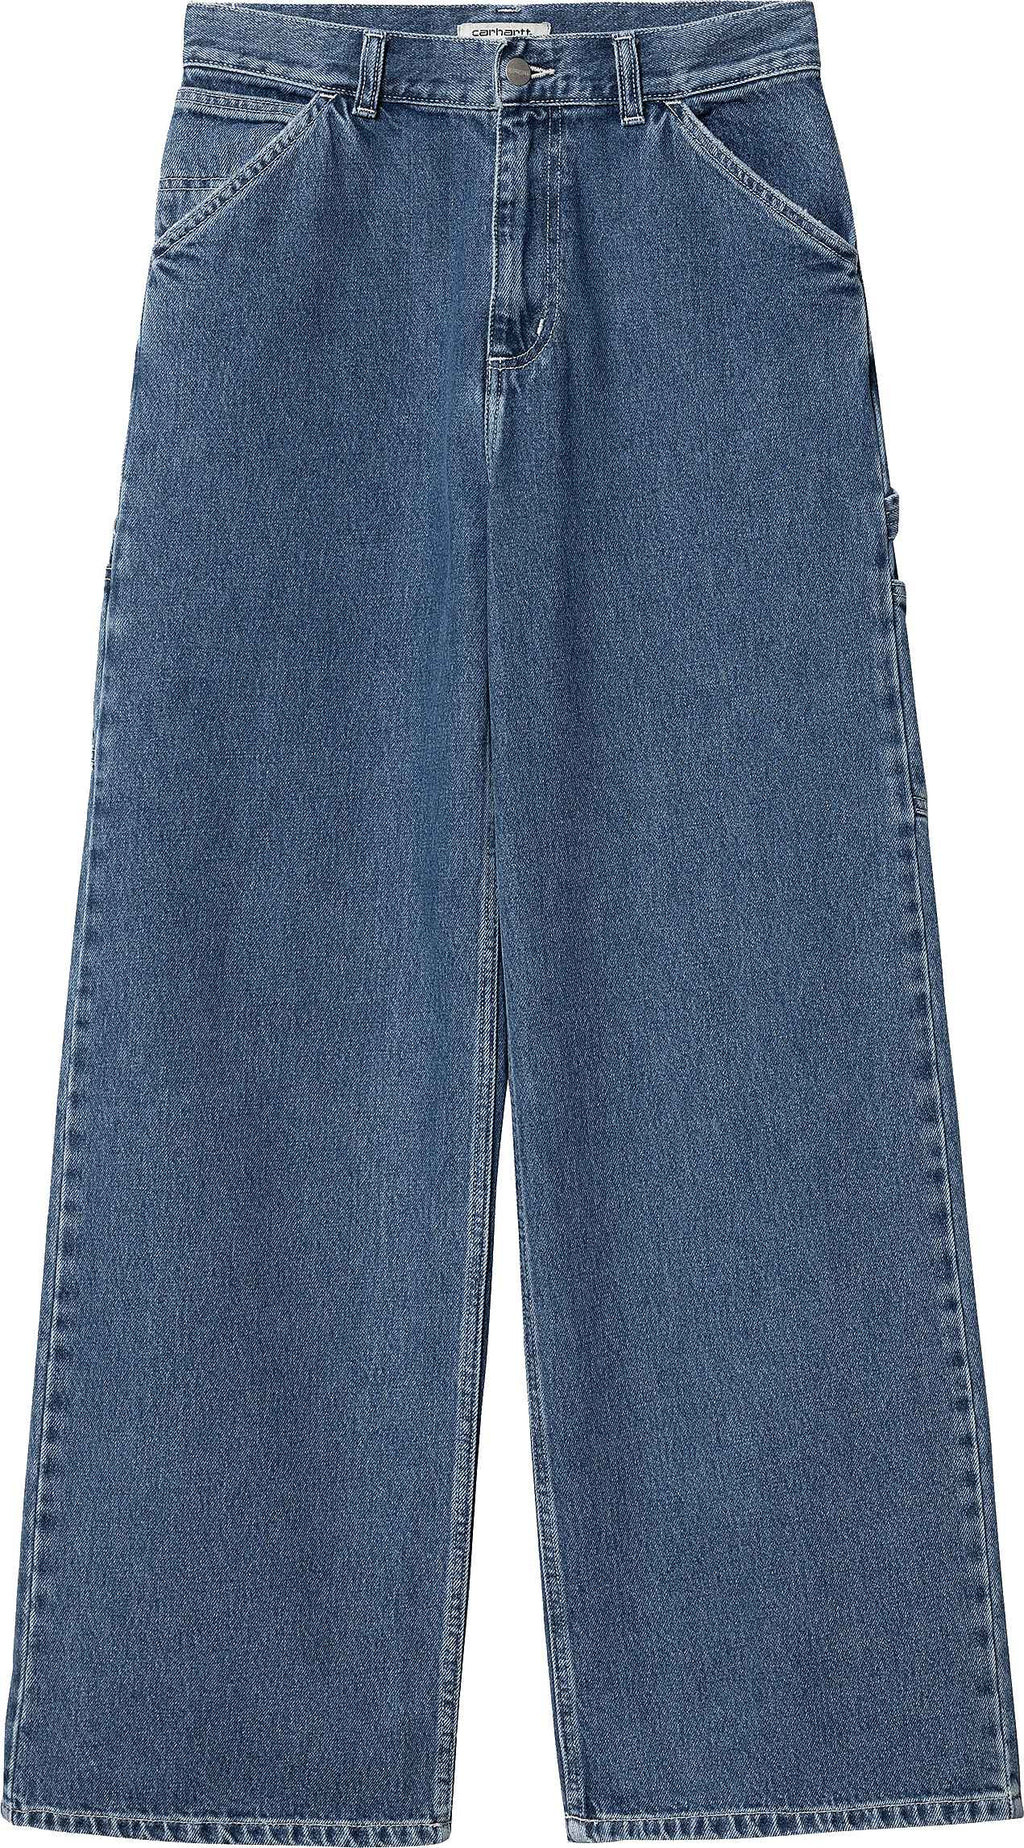  Carhartt Wip Jeans W Jens Pant Blue Stone Washed Donna - 2